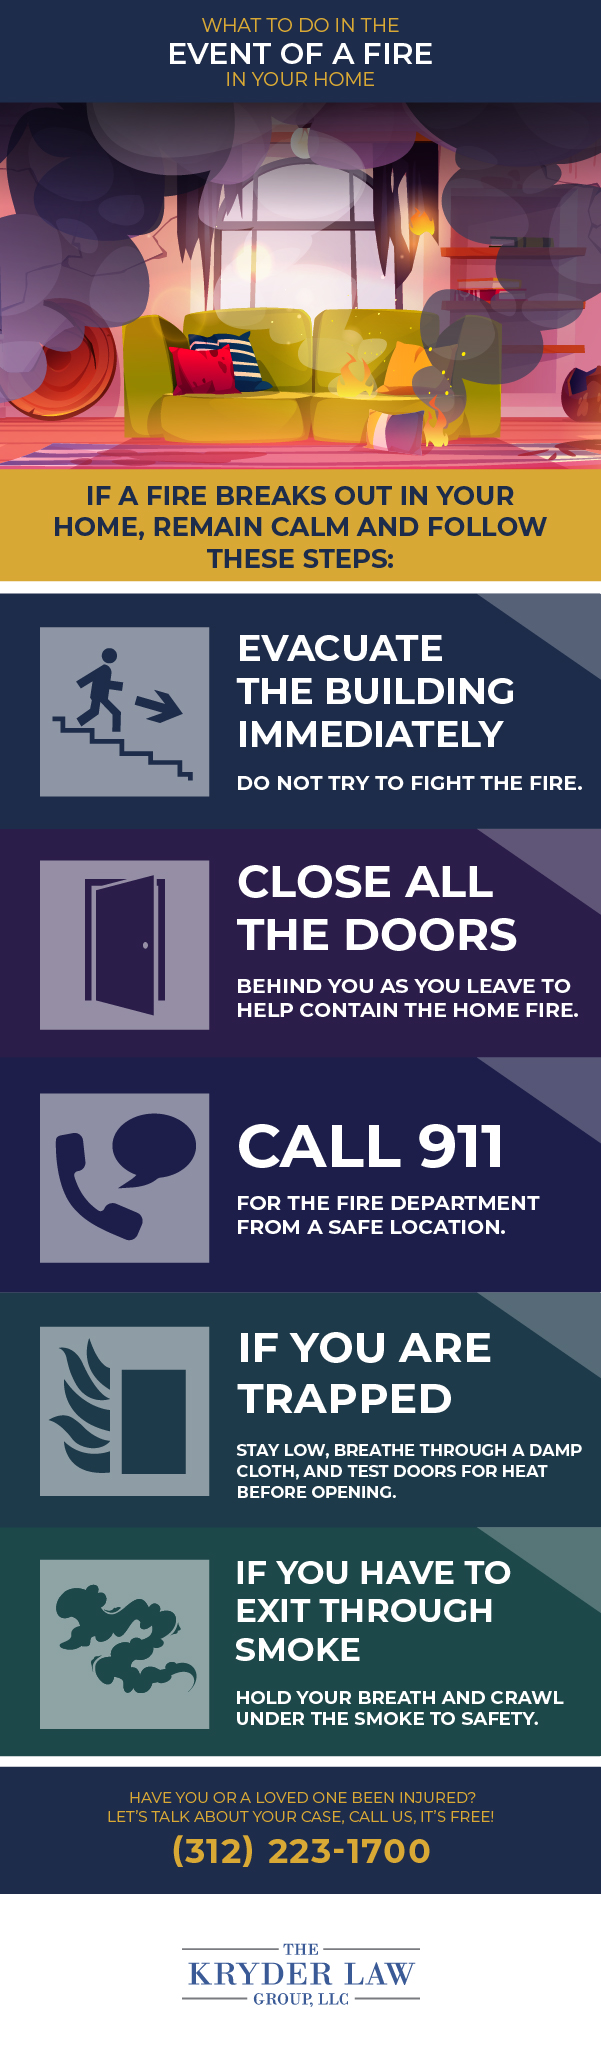 What to Do in the Event of a Fire in Your Home